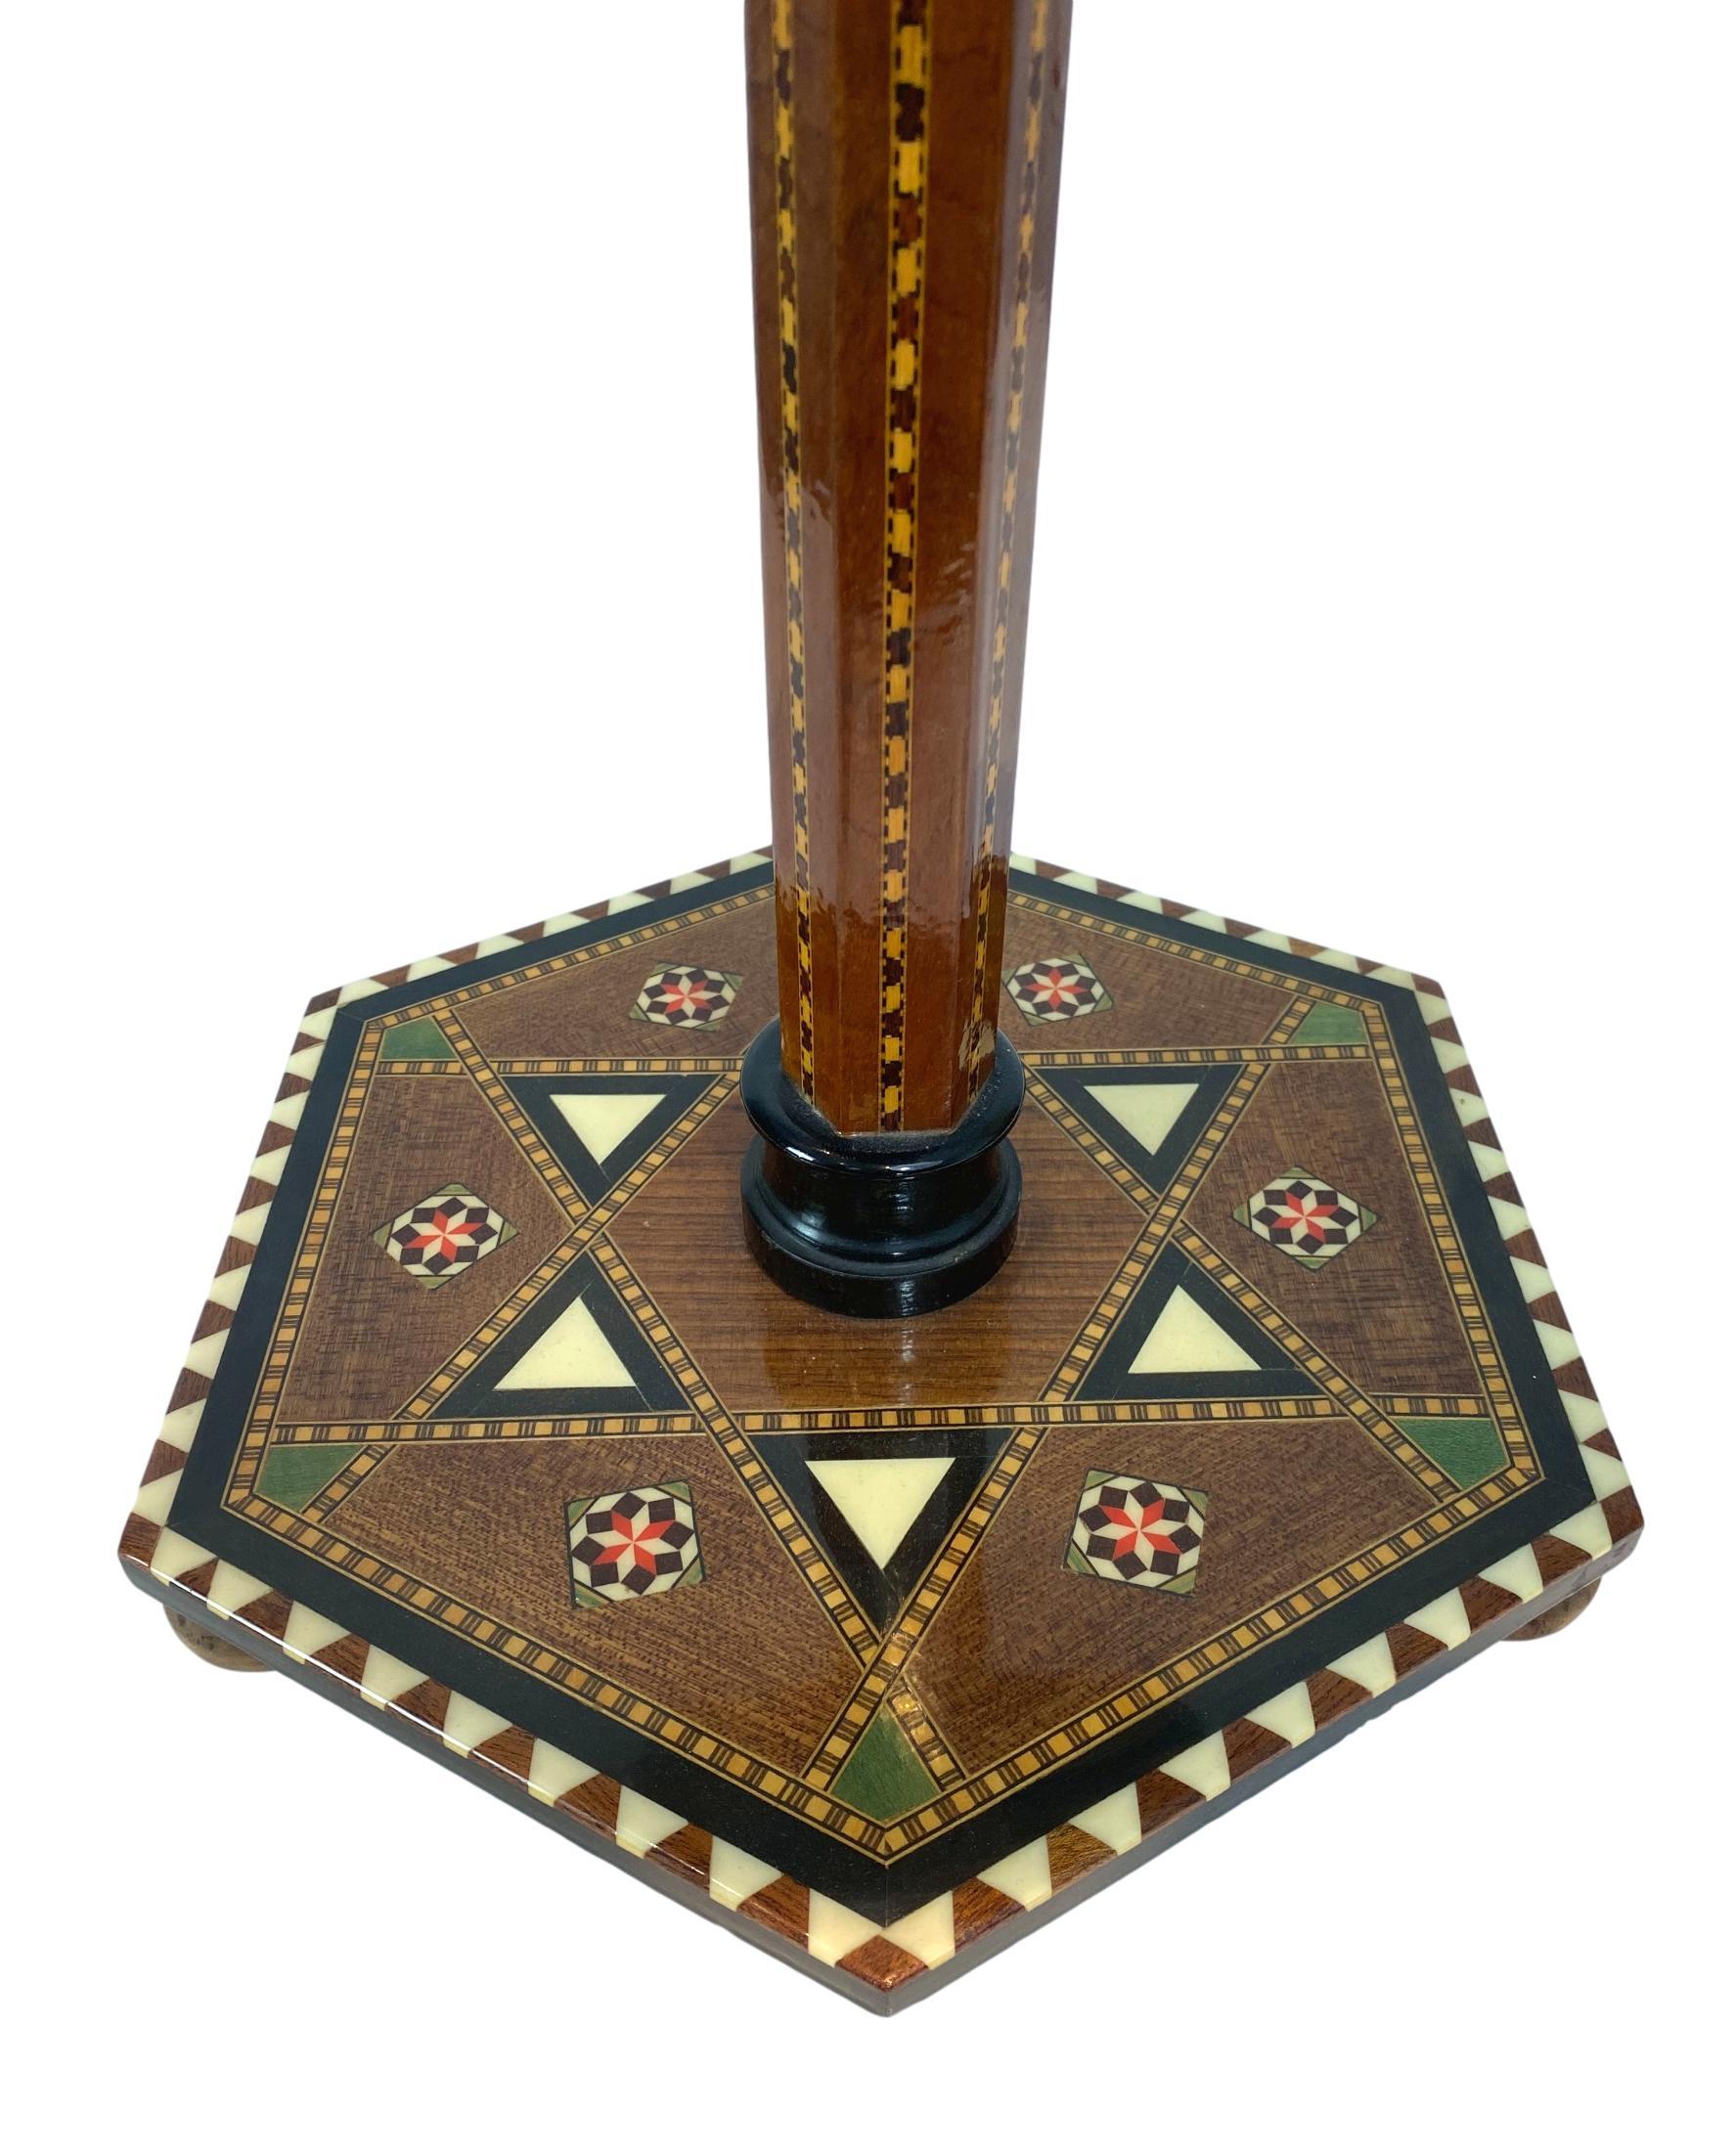 Syrian Hexagonal Table/Stand with Profuse and Exotic Detailed Inlays 1